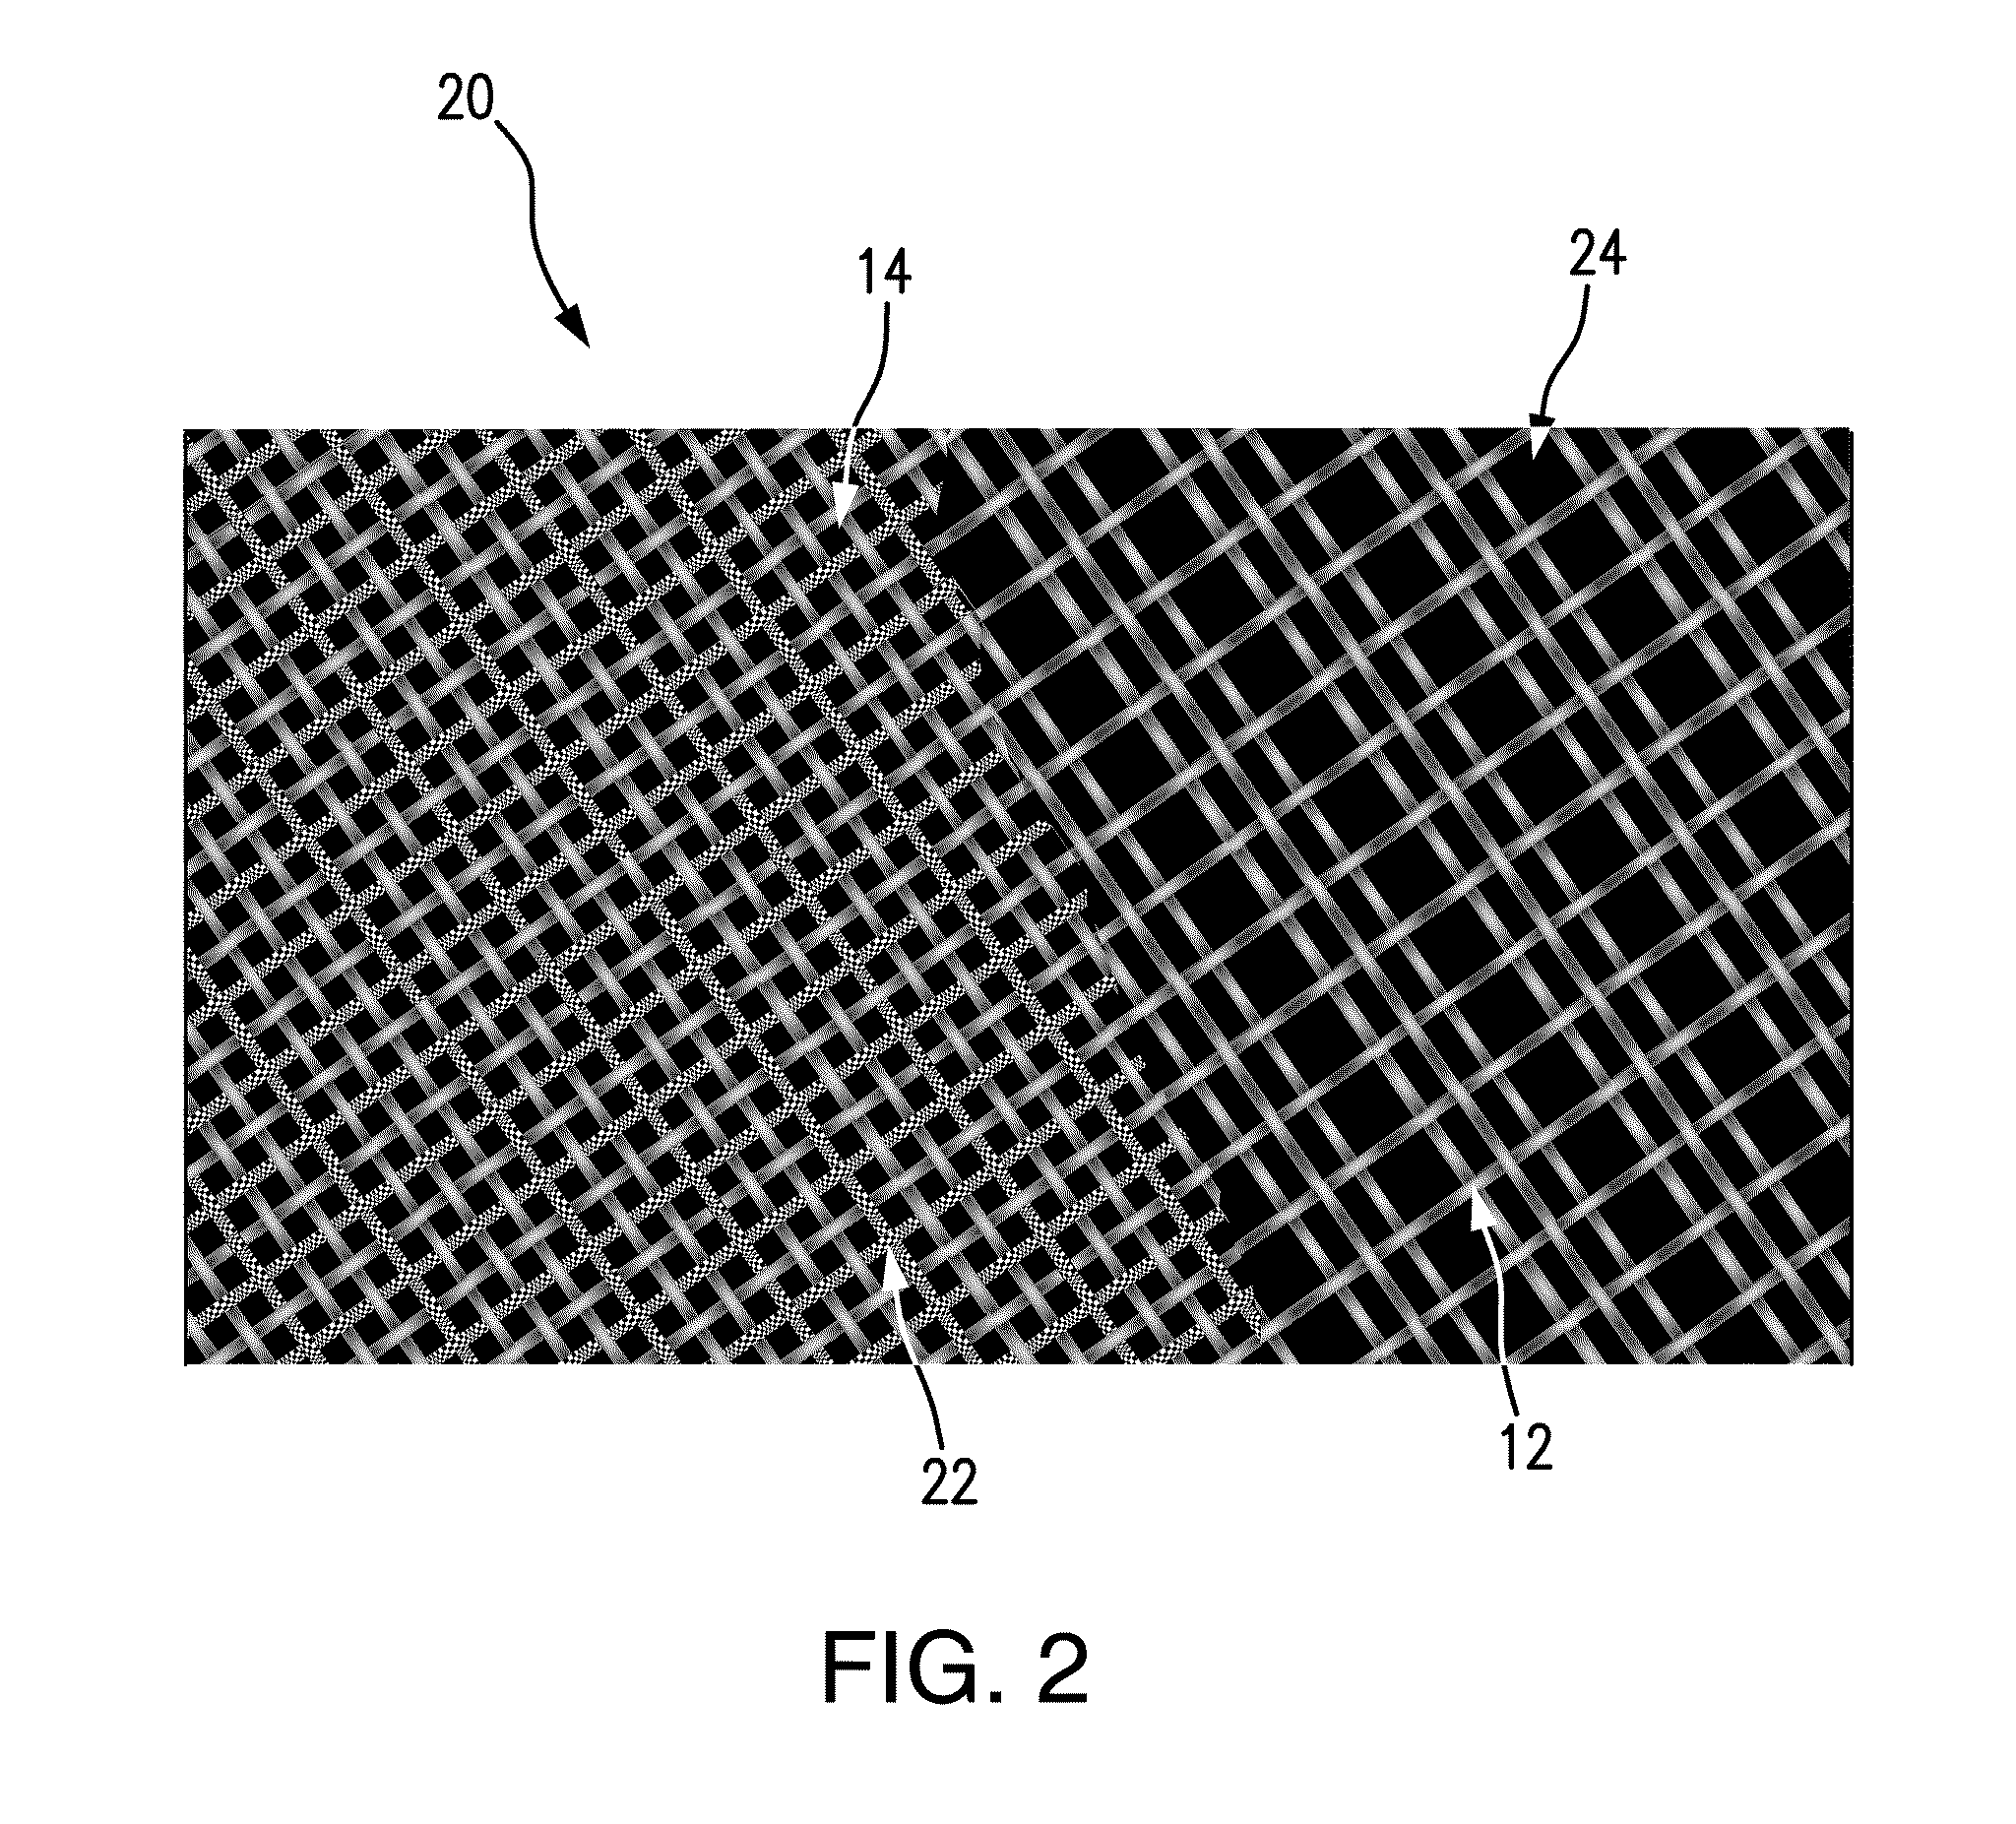 Surgical sutures incorporated with stem cells or other bioactive materials